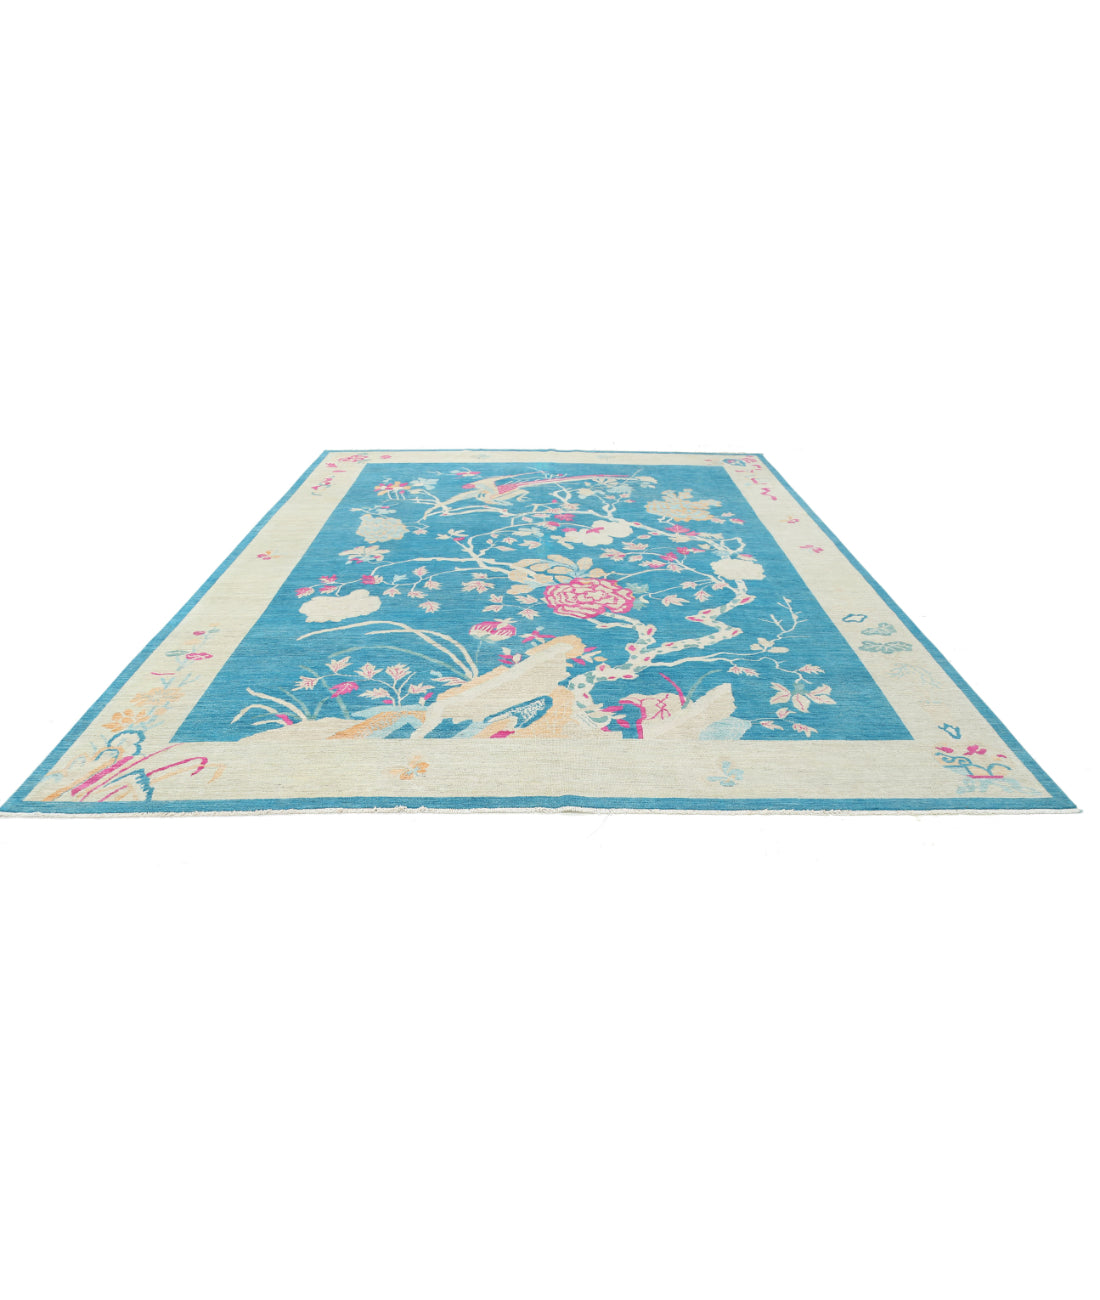 Hand Knotted Chinese Wool Rug - 10'2'' x 13'8'' 10'2'' x 13'8'' (305 X 410) / Blue / Ivory